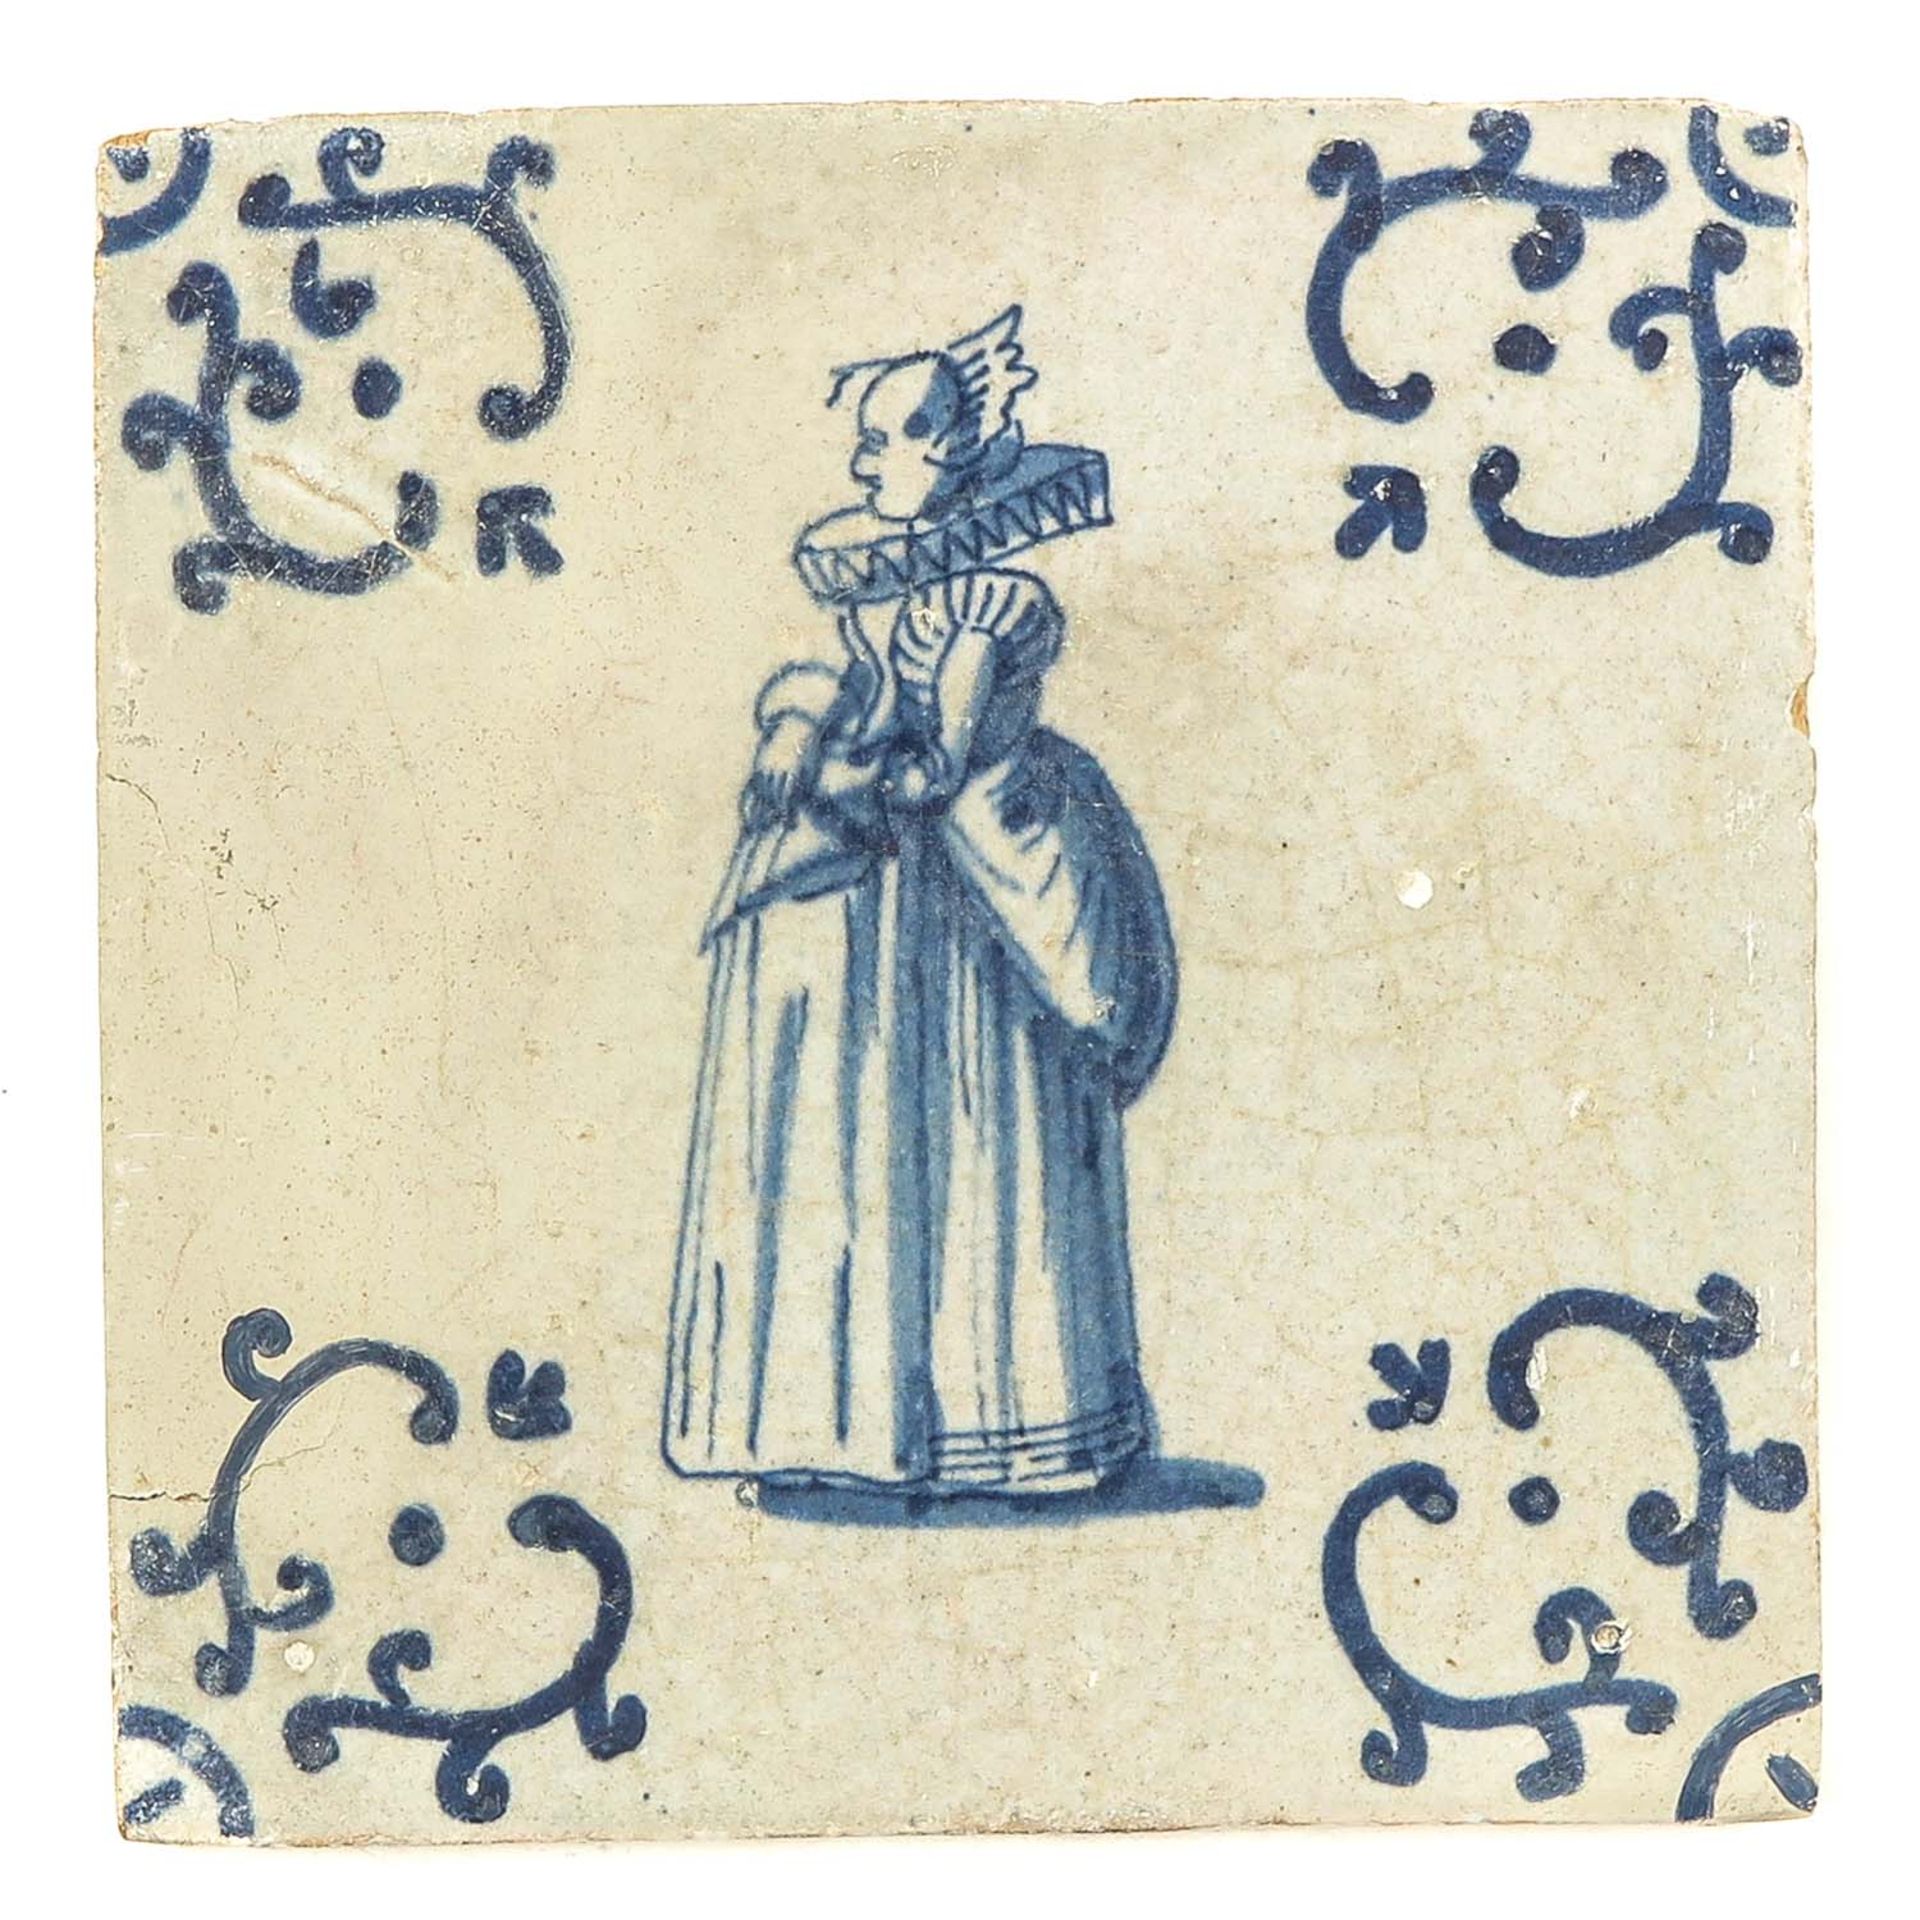 A Collection of 3 Dutch 17th Century Tiles - Image 5 of 5